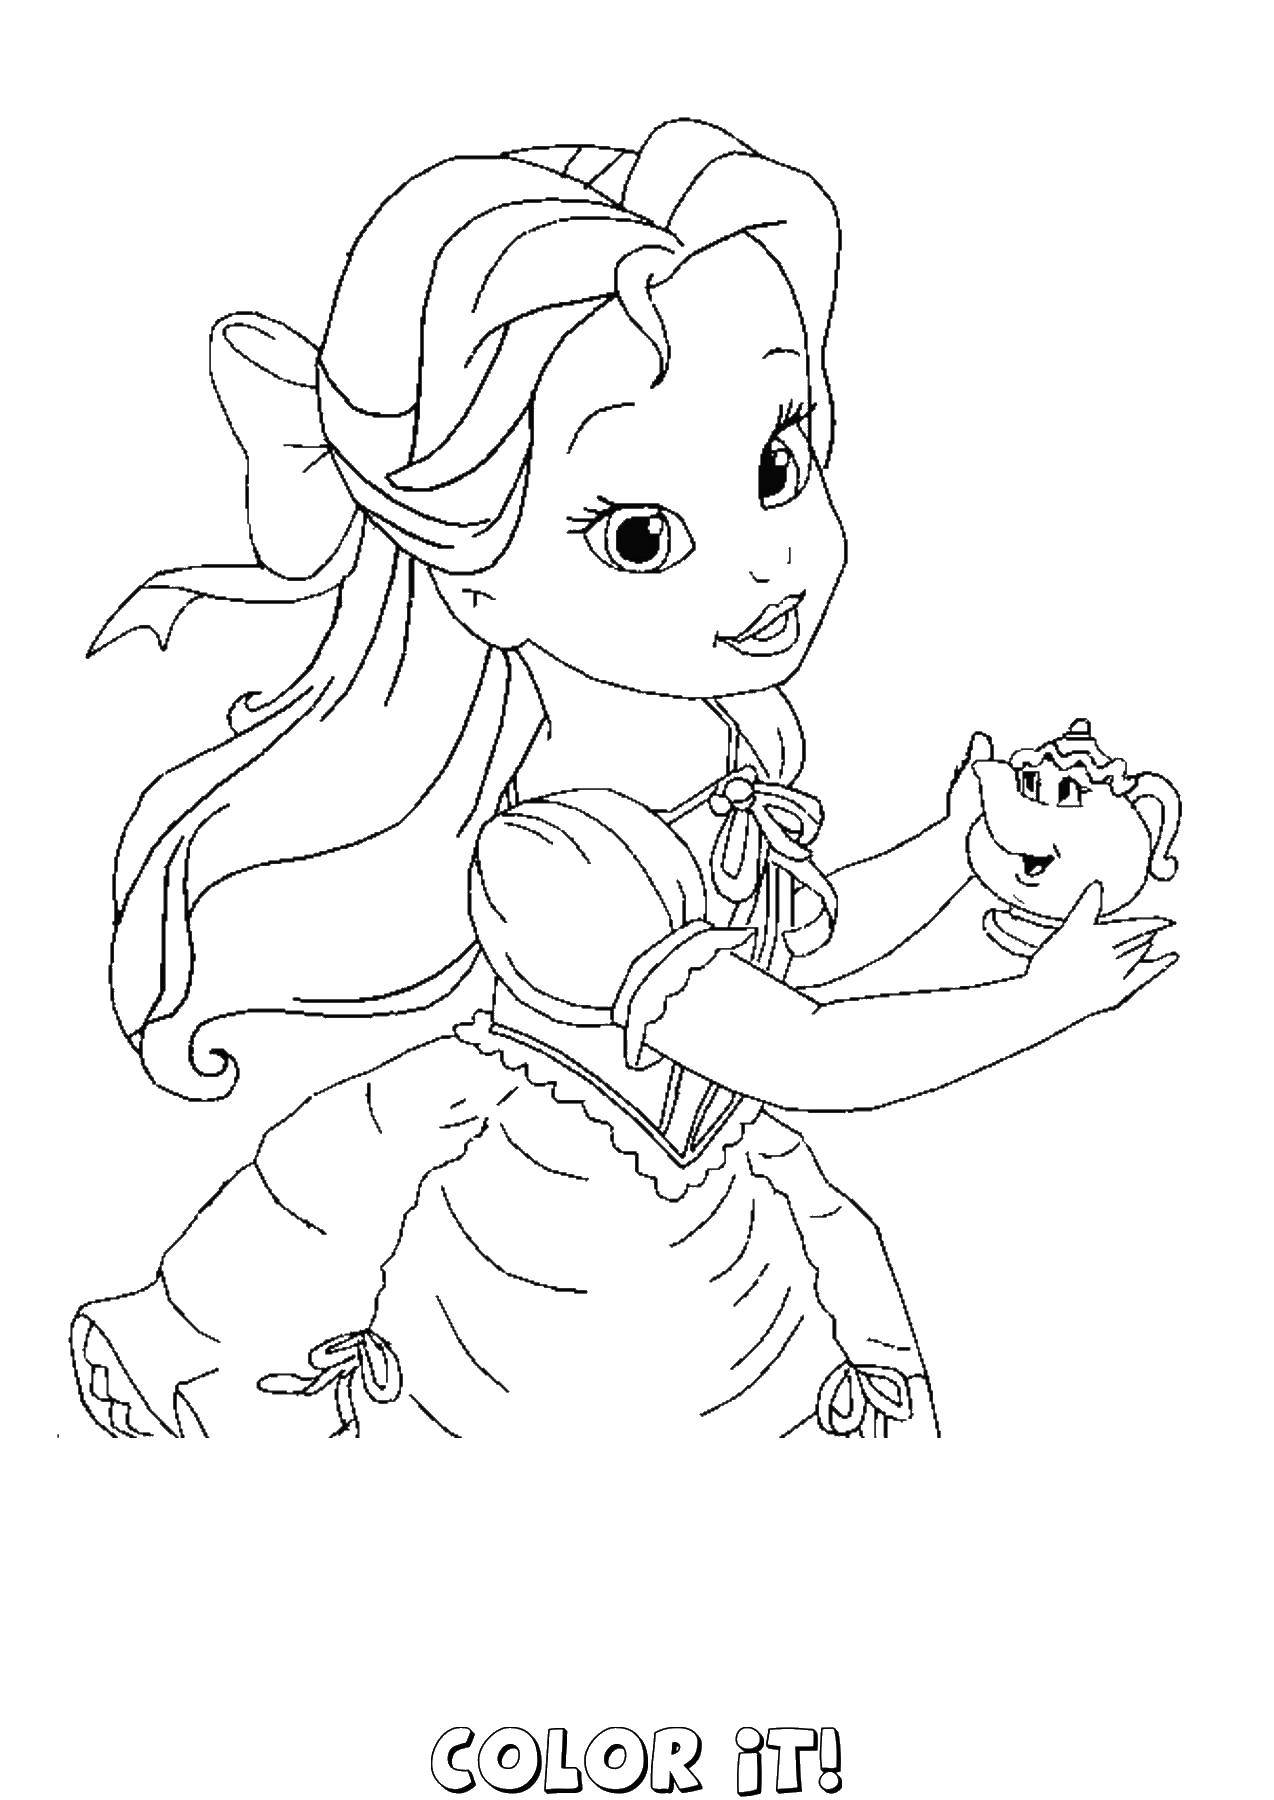 Coloring Sweetie Belle. Category Princess. Tags:  Beauty and the Beast, Disney.